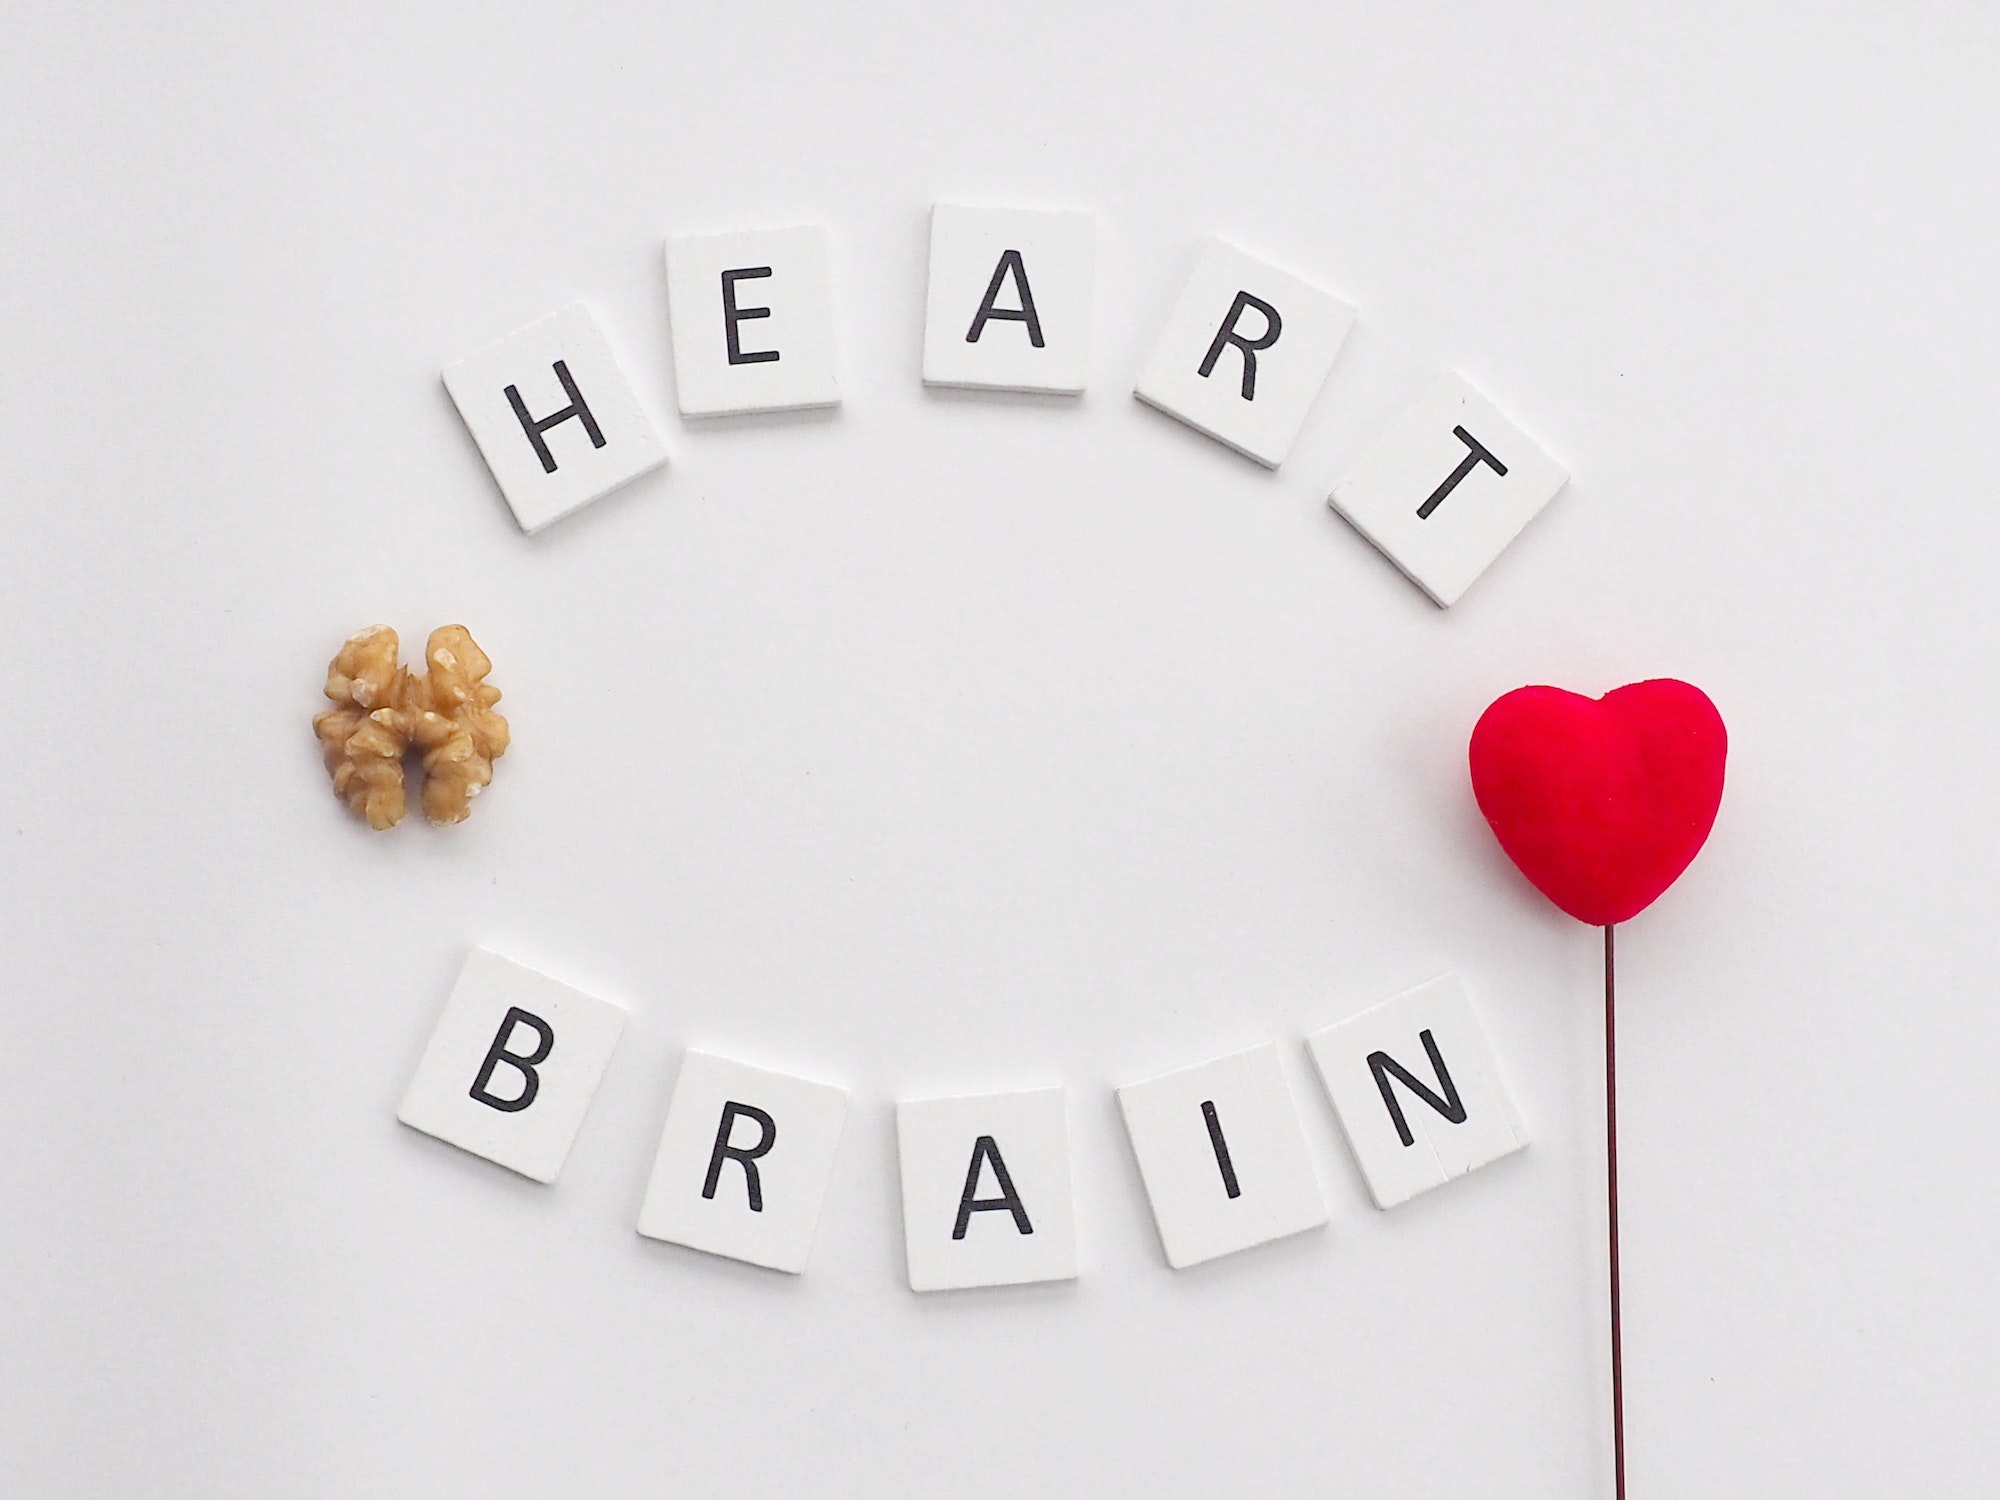 The words Heart and Brain with a red heart on the white background